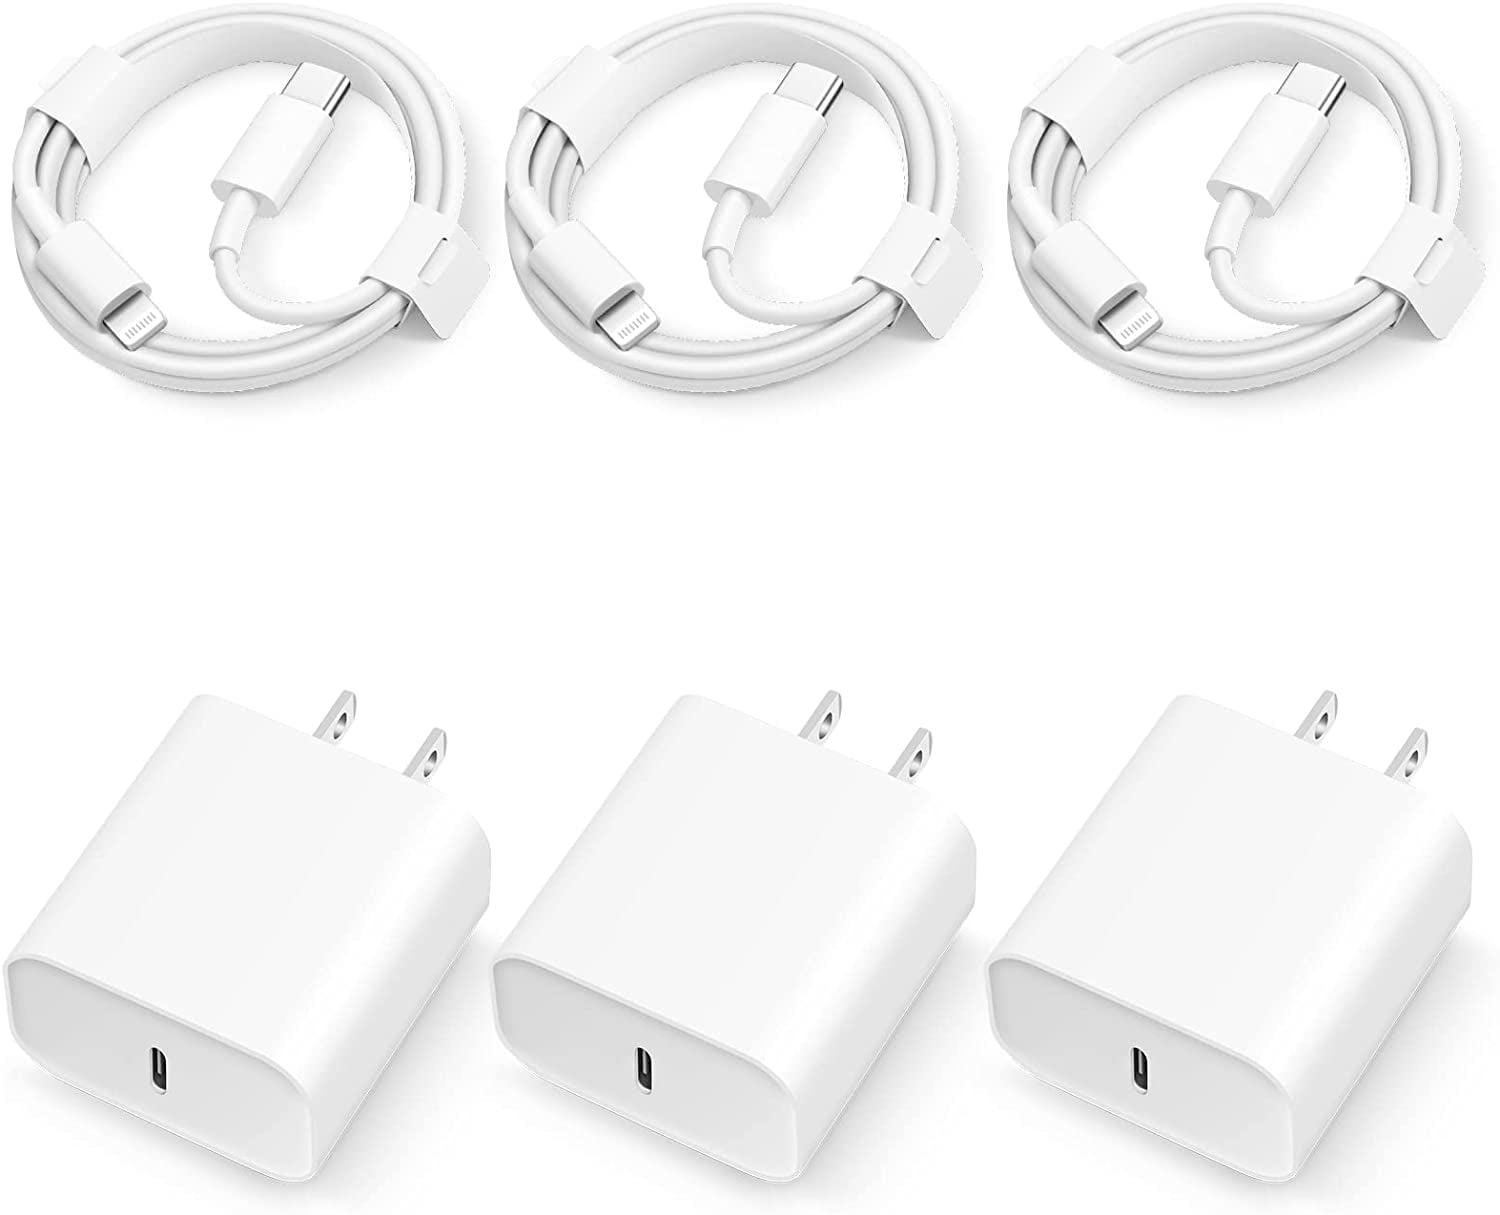 Chargeur Iphone, chargeur Apple rapide Iphone Pack Usb C Chargeur